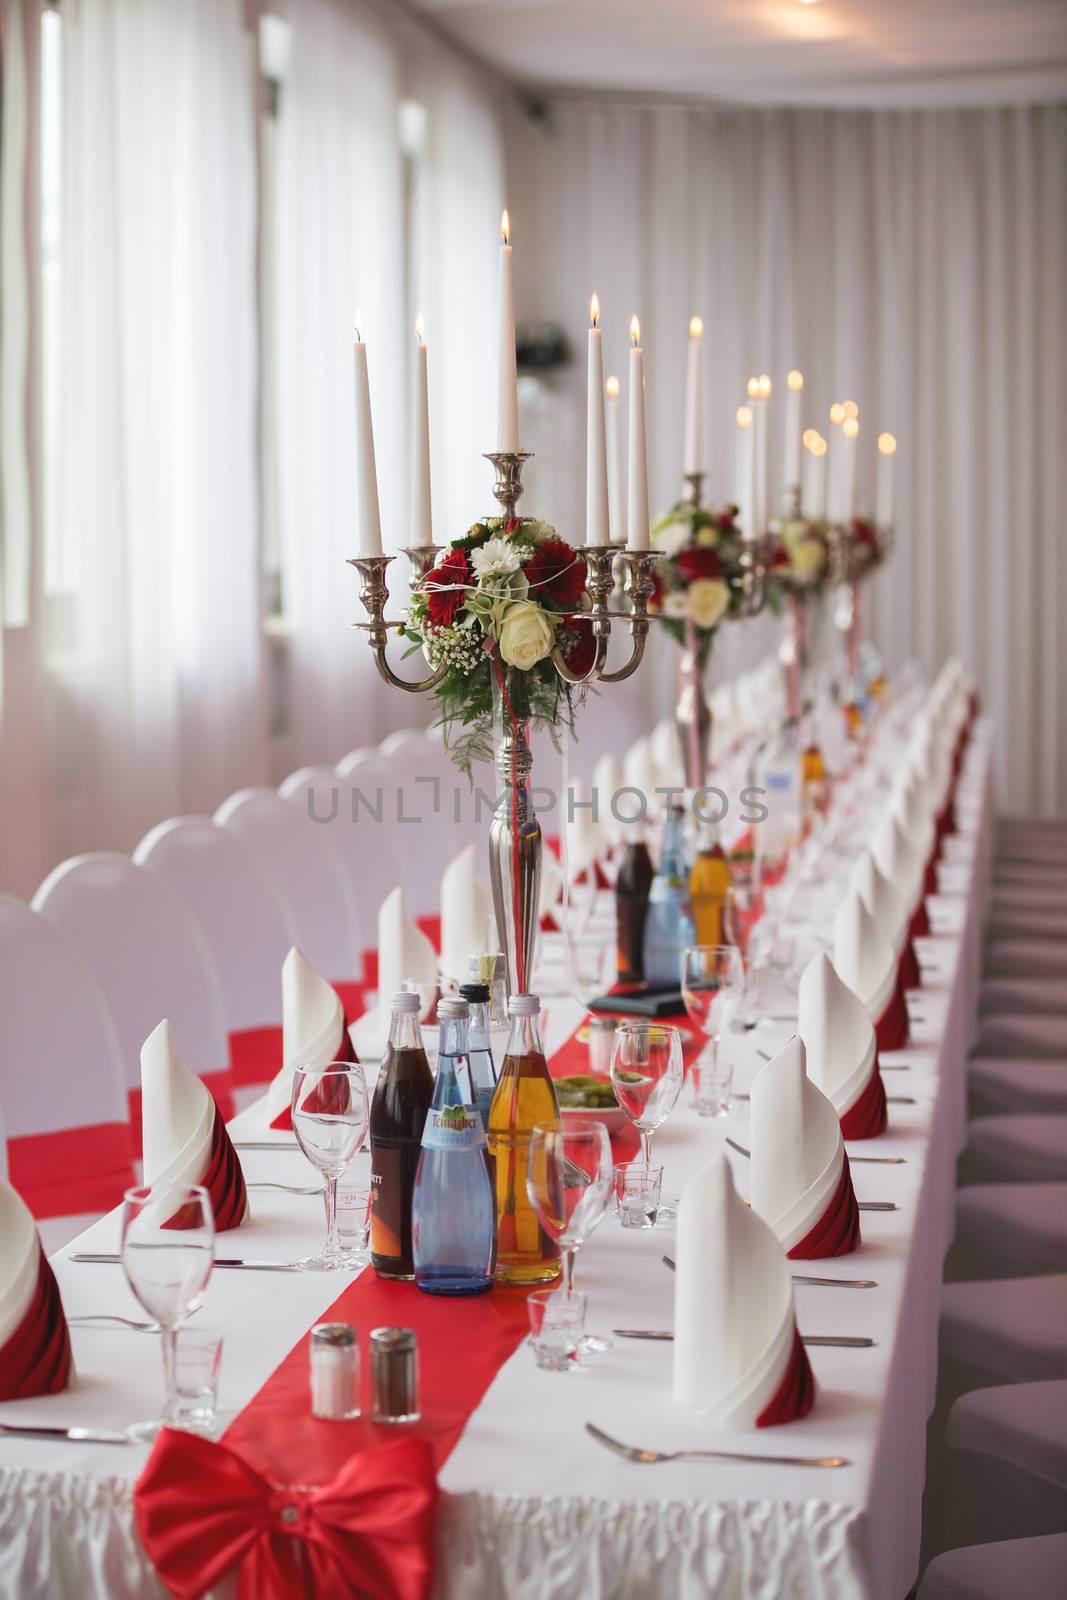 Decoration of a hall for a wedding by 25ehaag6